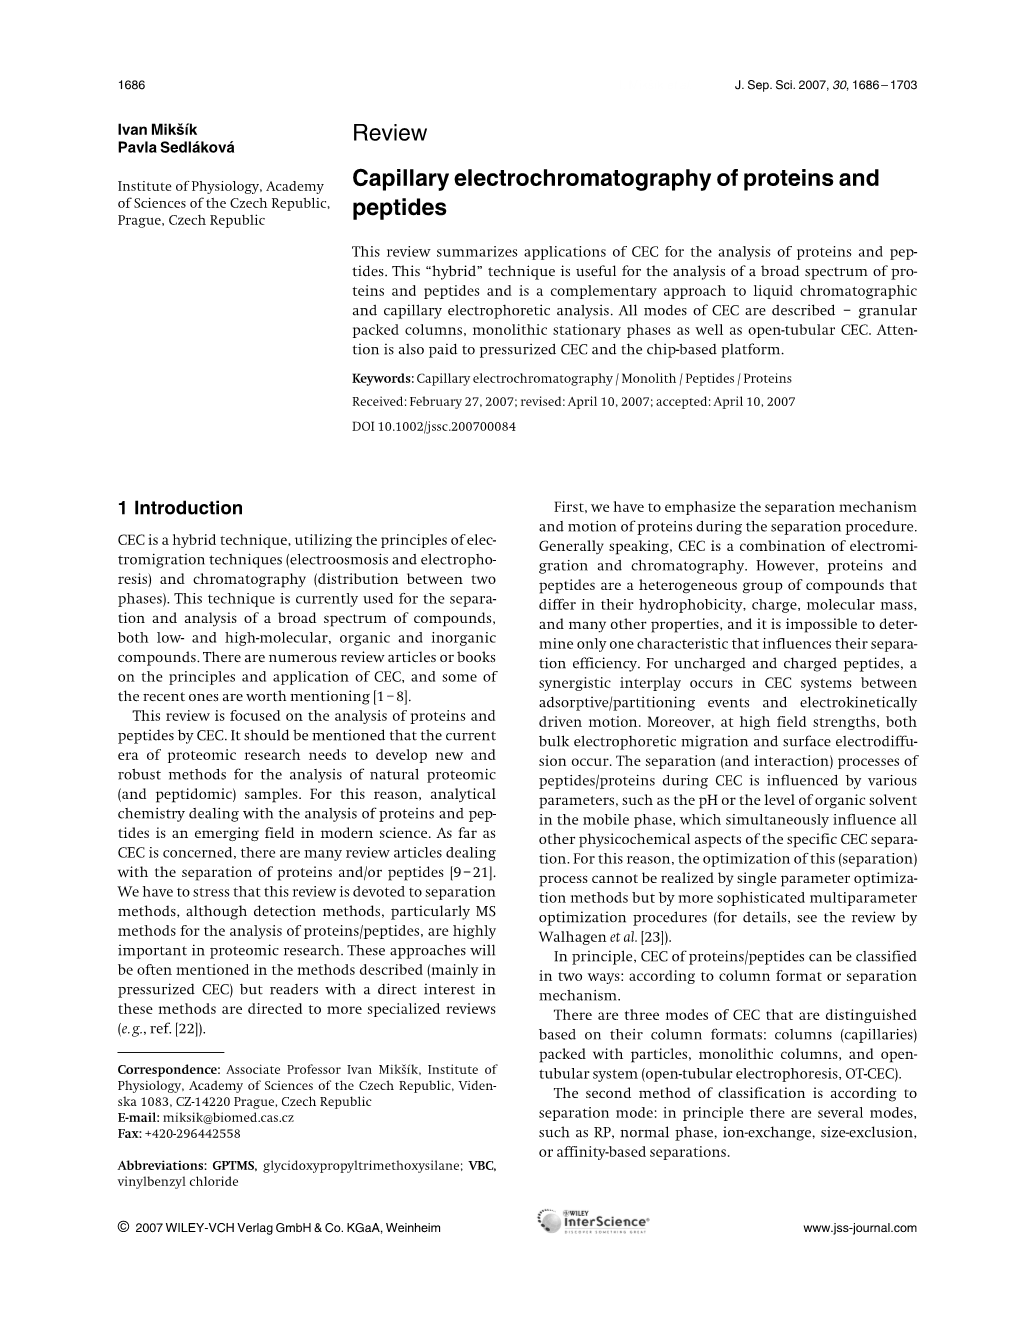 Capillary Electrochromatography of Proteins and Peptides